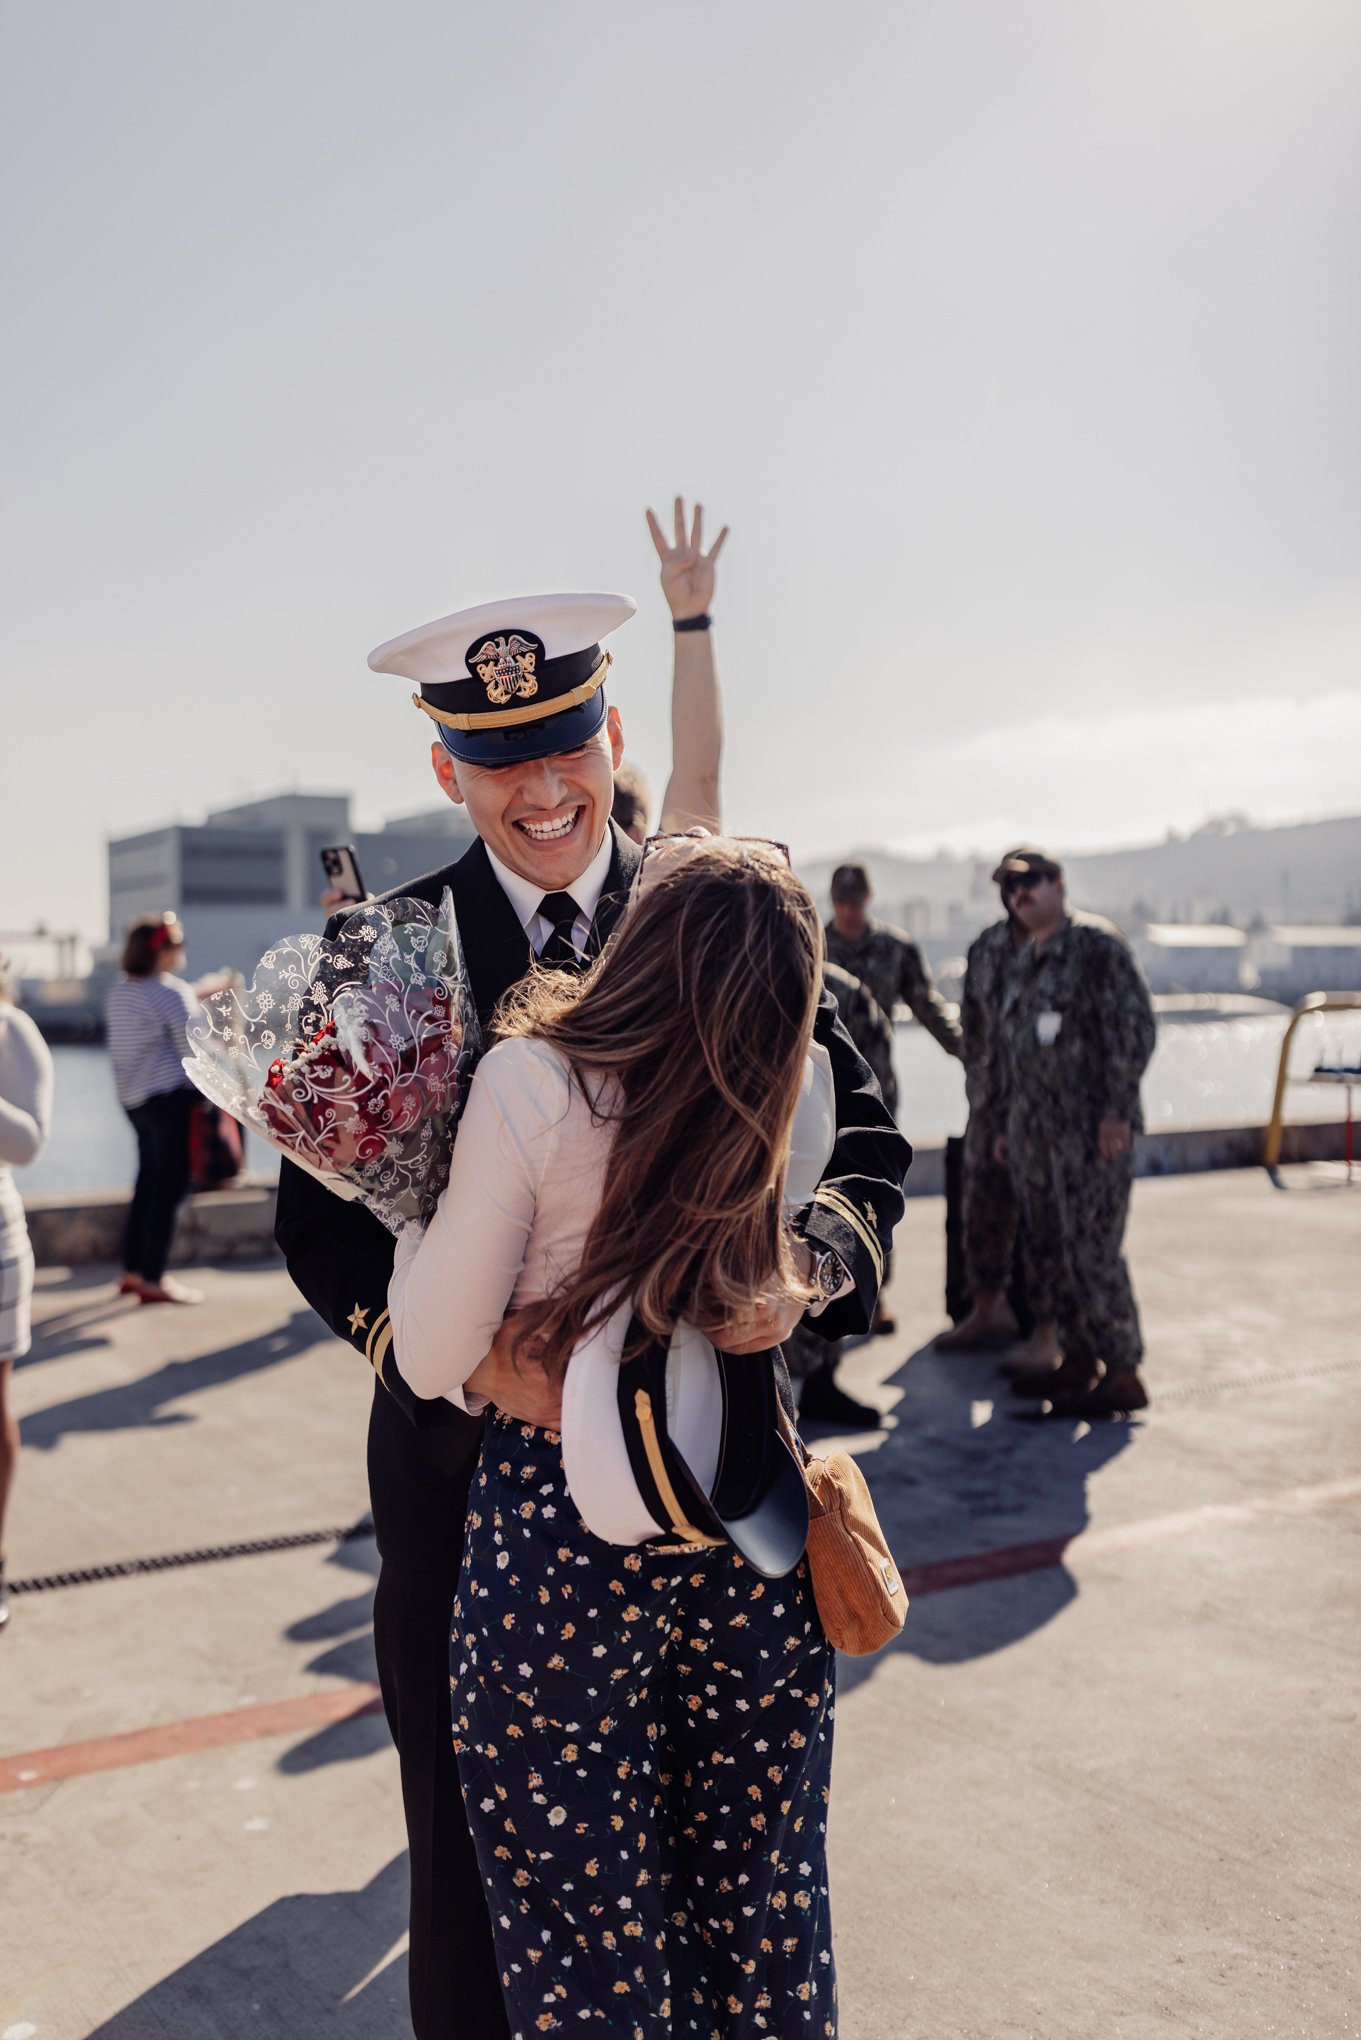 Fiancee of Navy officer hugging after long submarine deployment in San Diego ca